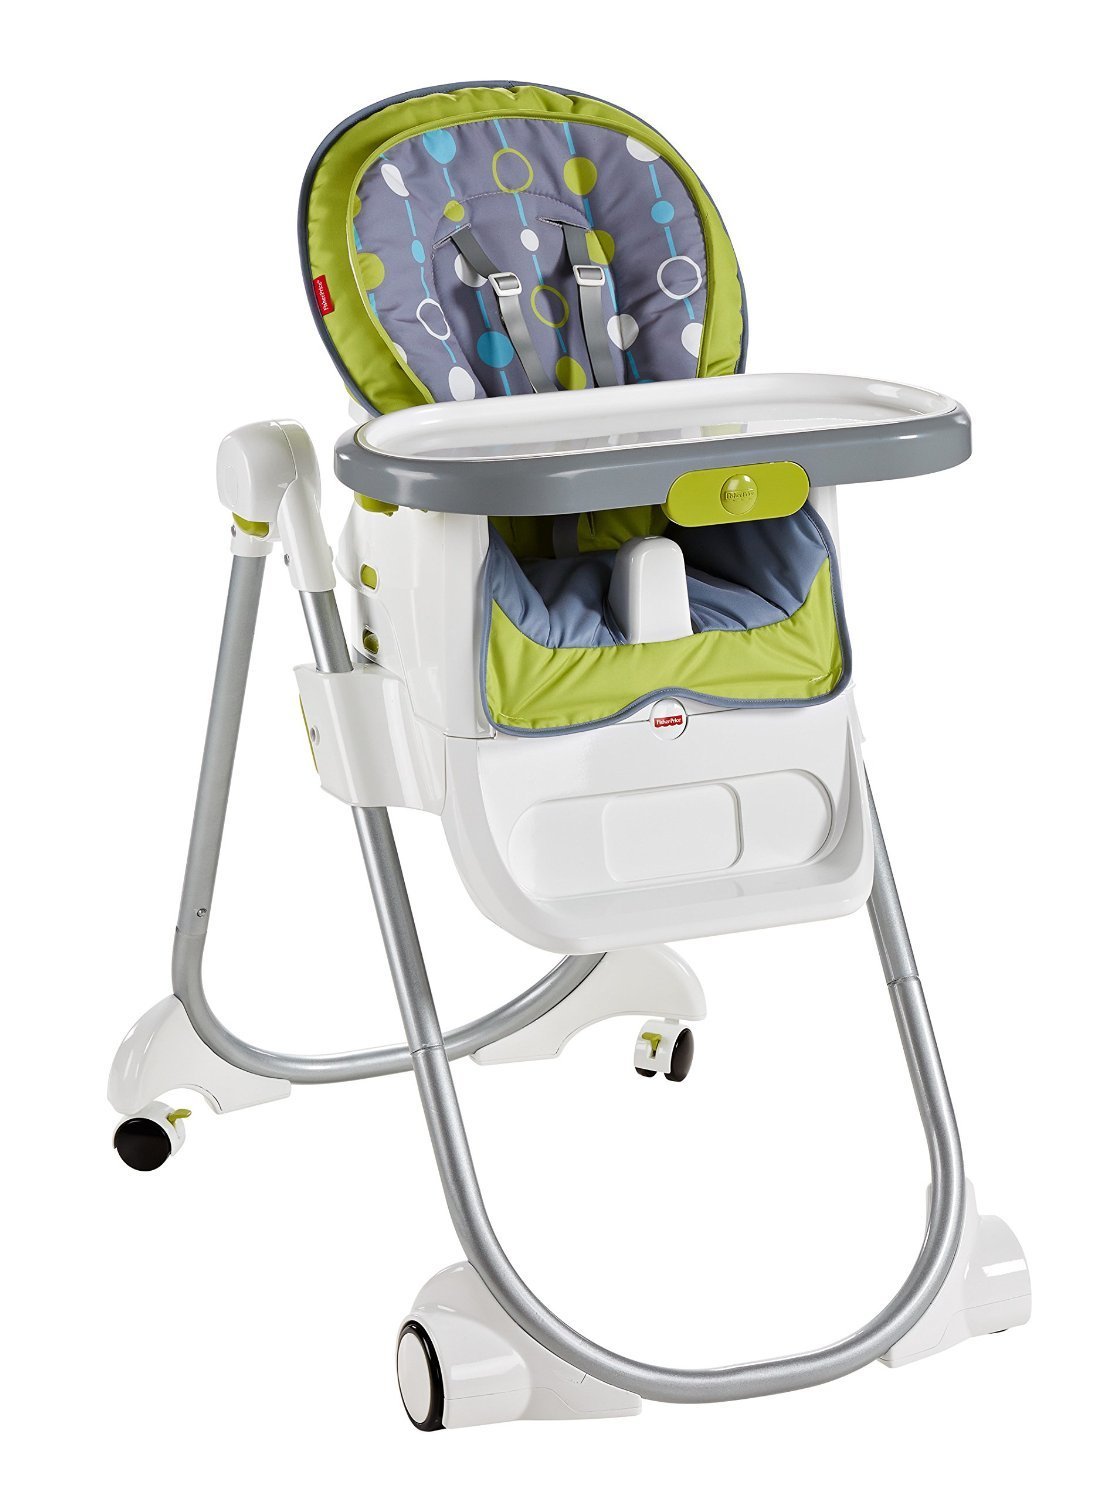 high chair for baby price